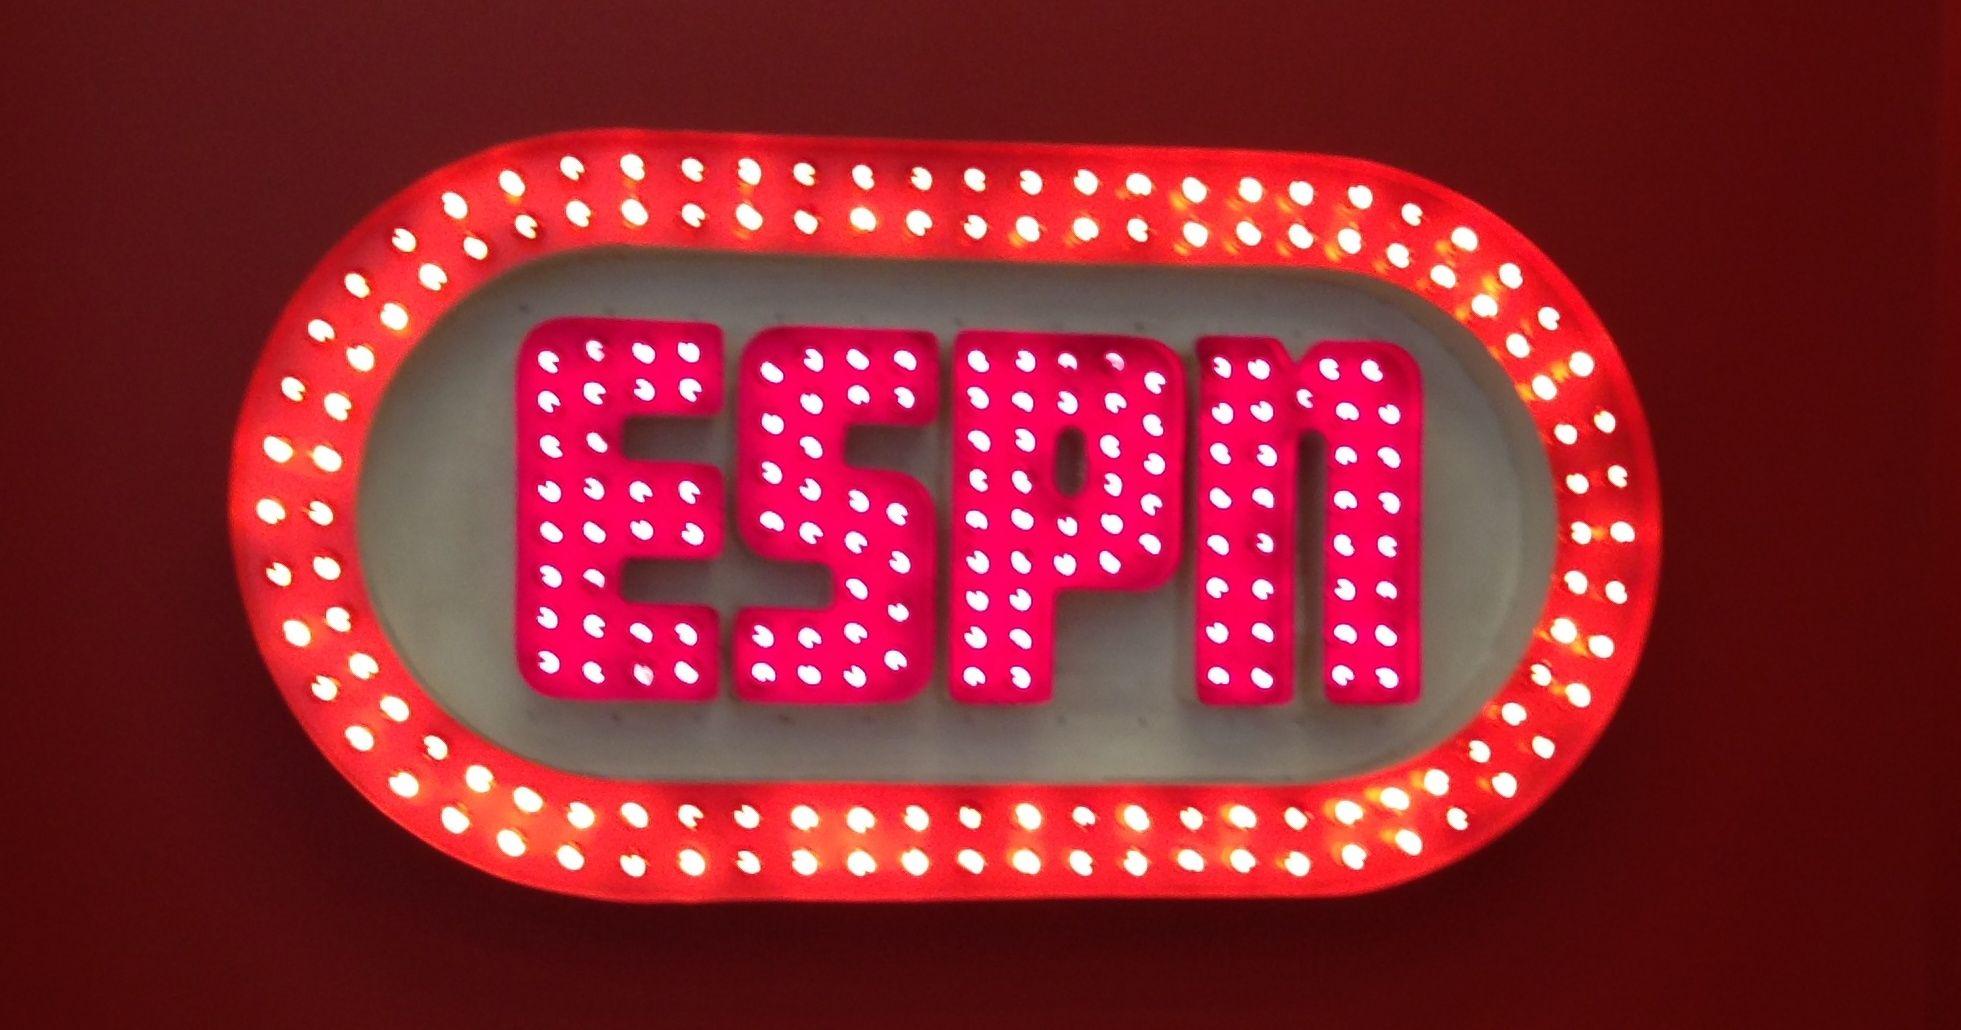 New ESPN Logo - Who is the new face of ESPN?